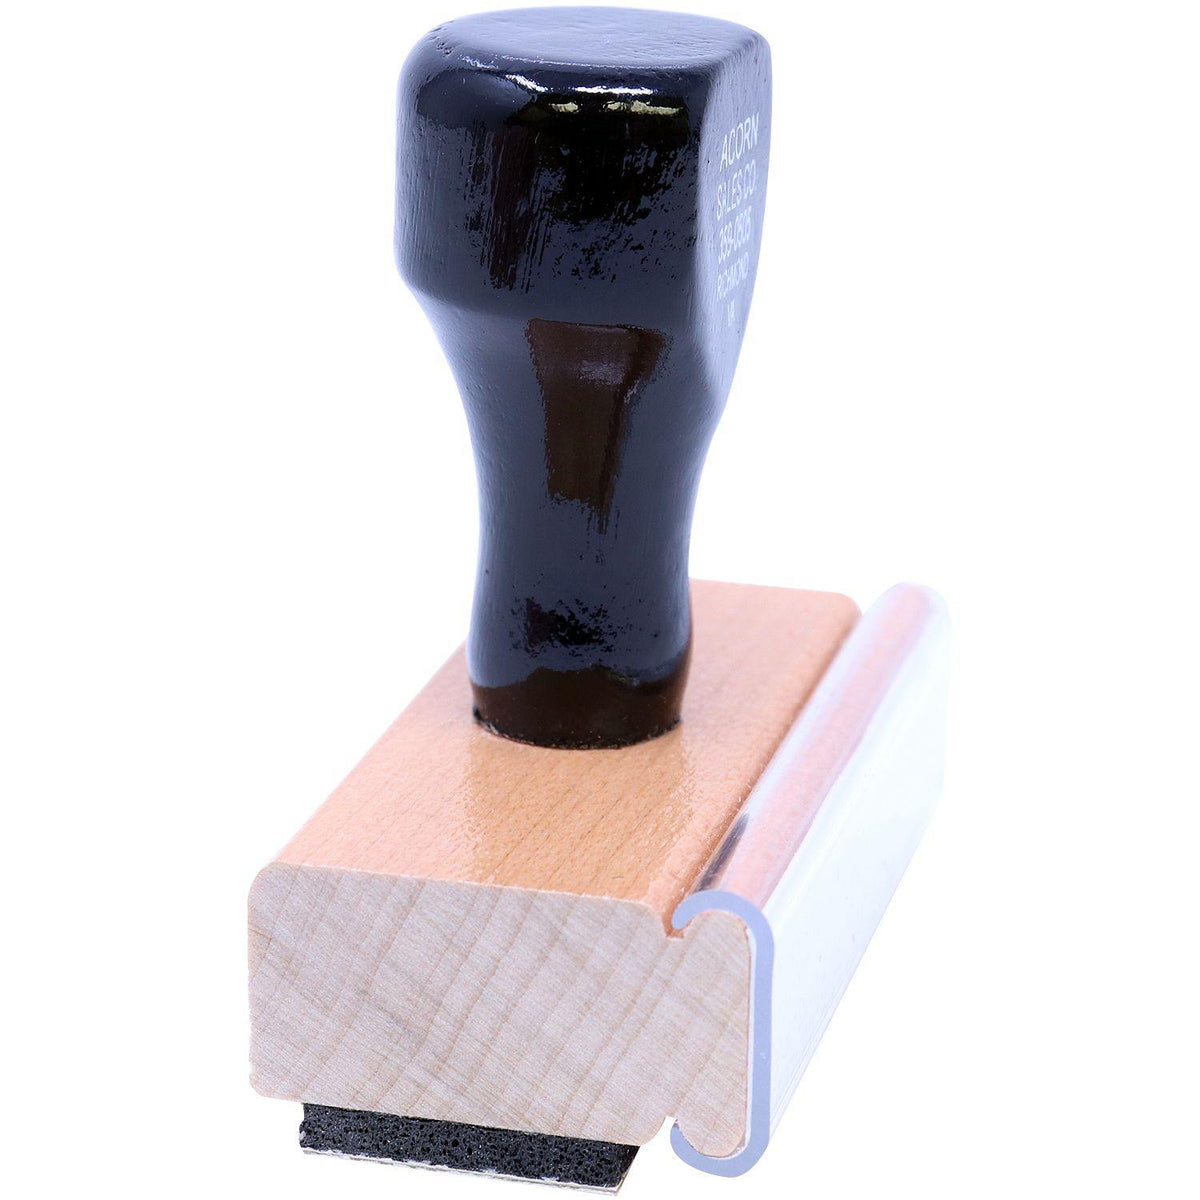 Side View of Acreditado Rubber Stamp at an Angle